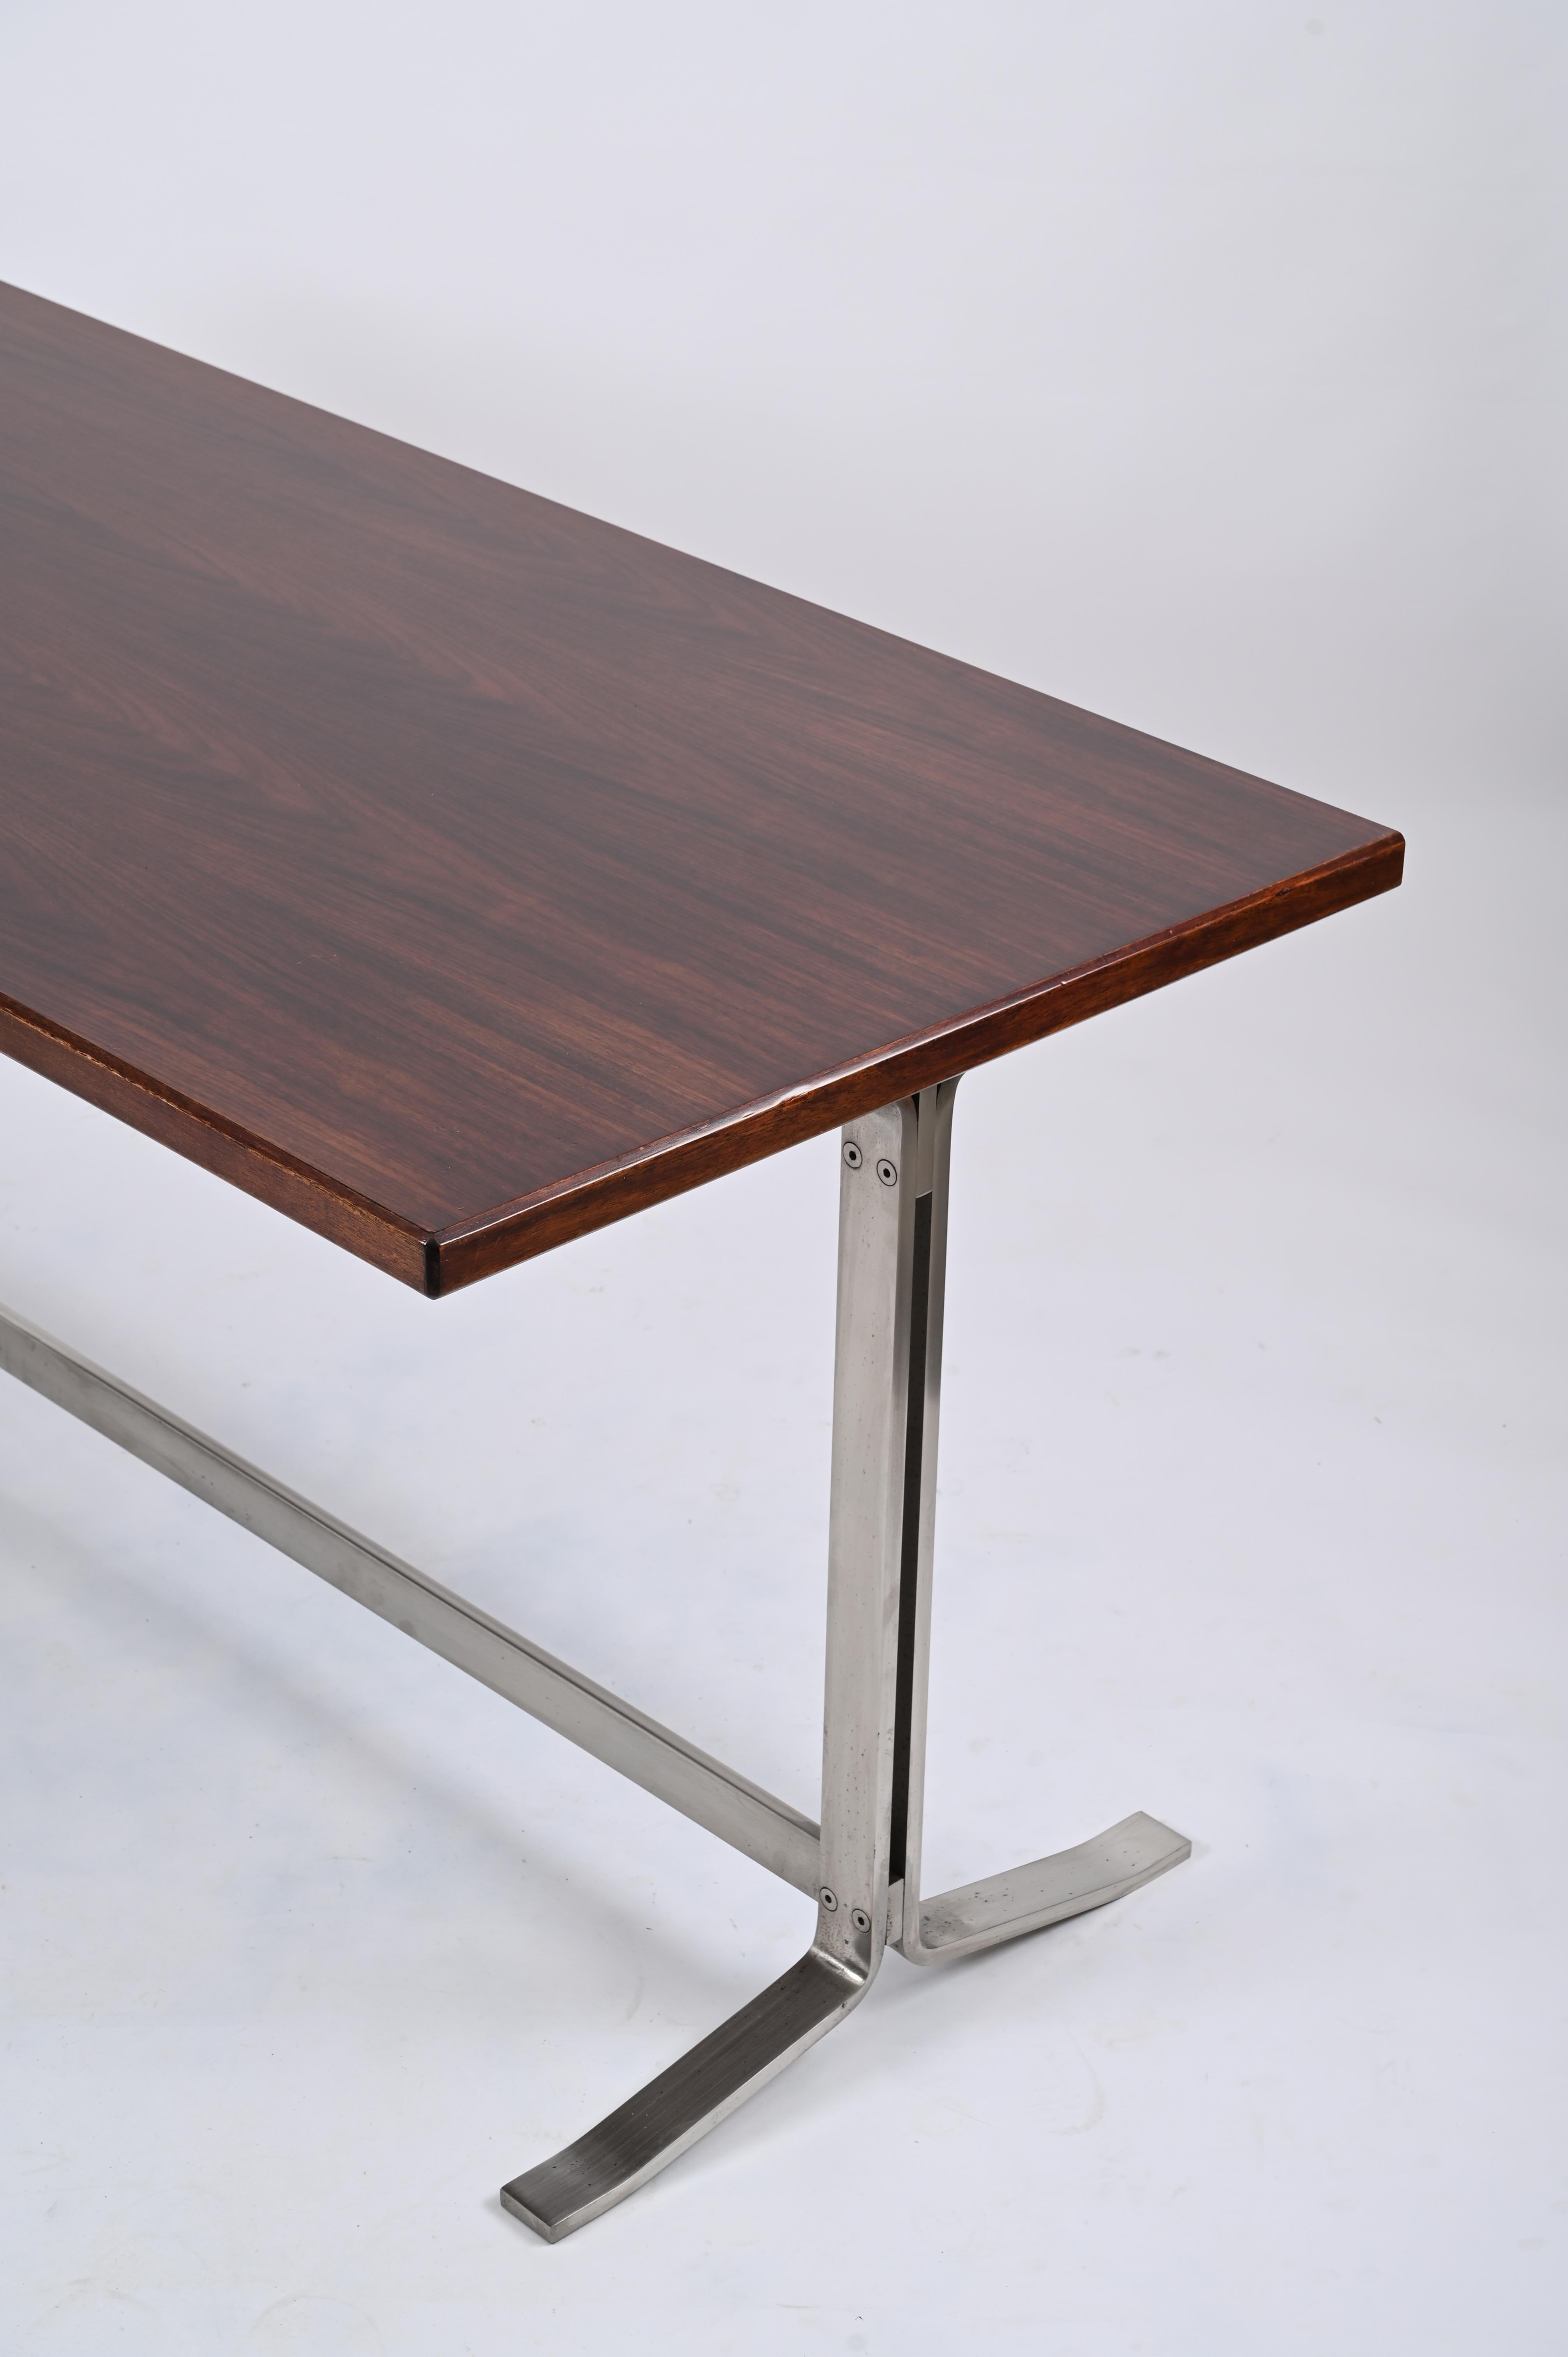 Midcentury Desk in Walnut and Steel by Moscatelli for Formanova, Italy, 1965 For Sale 12